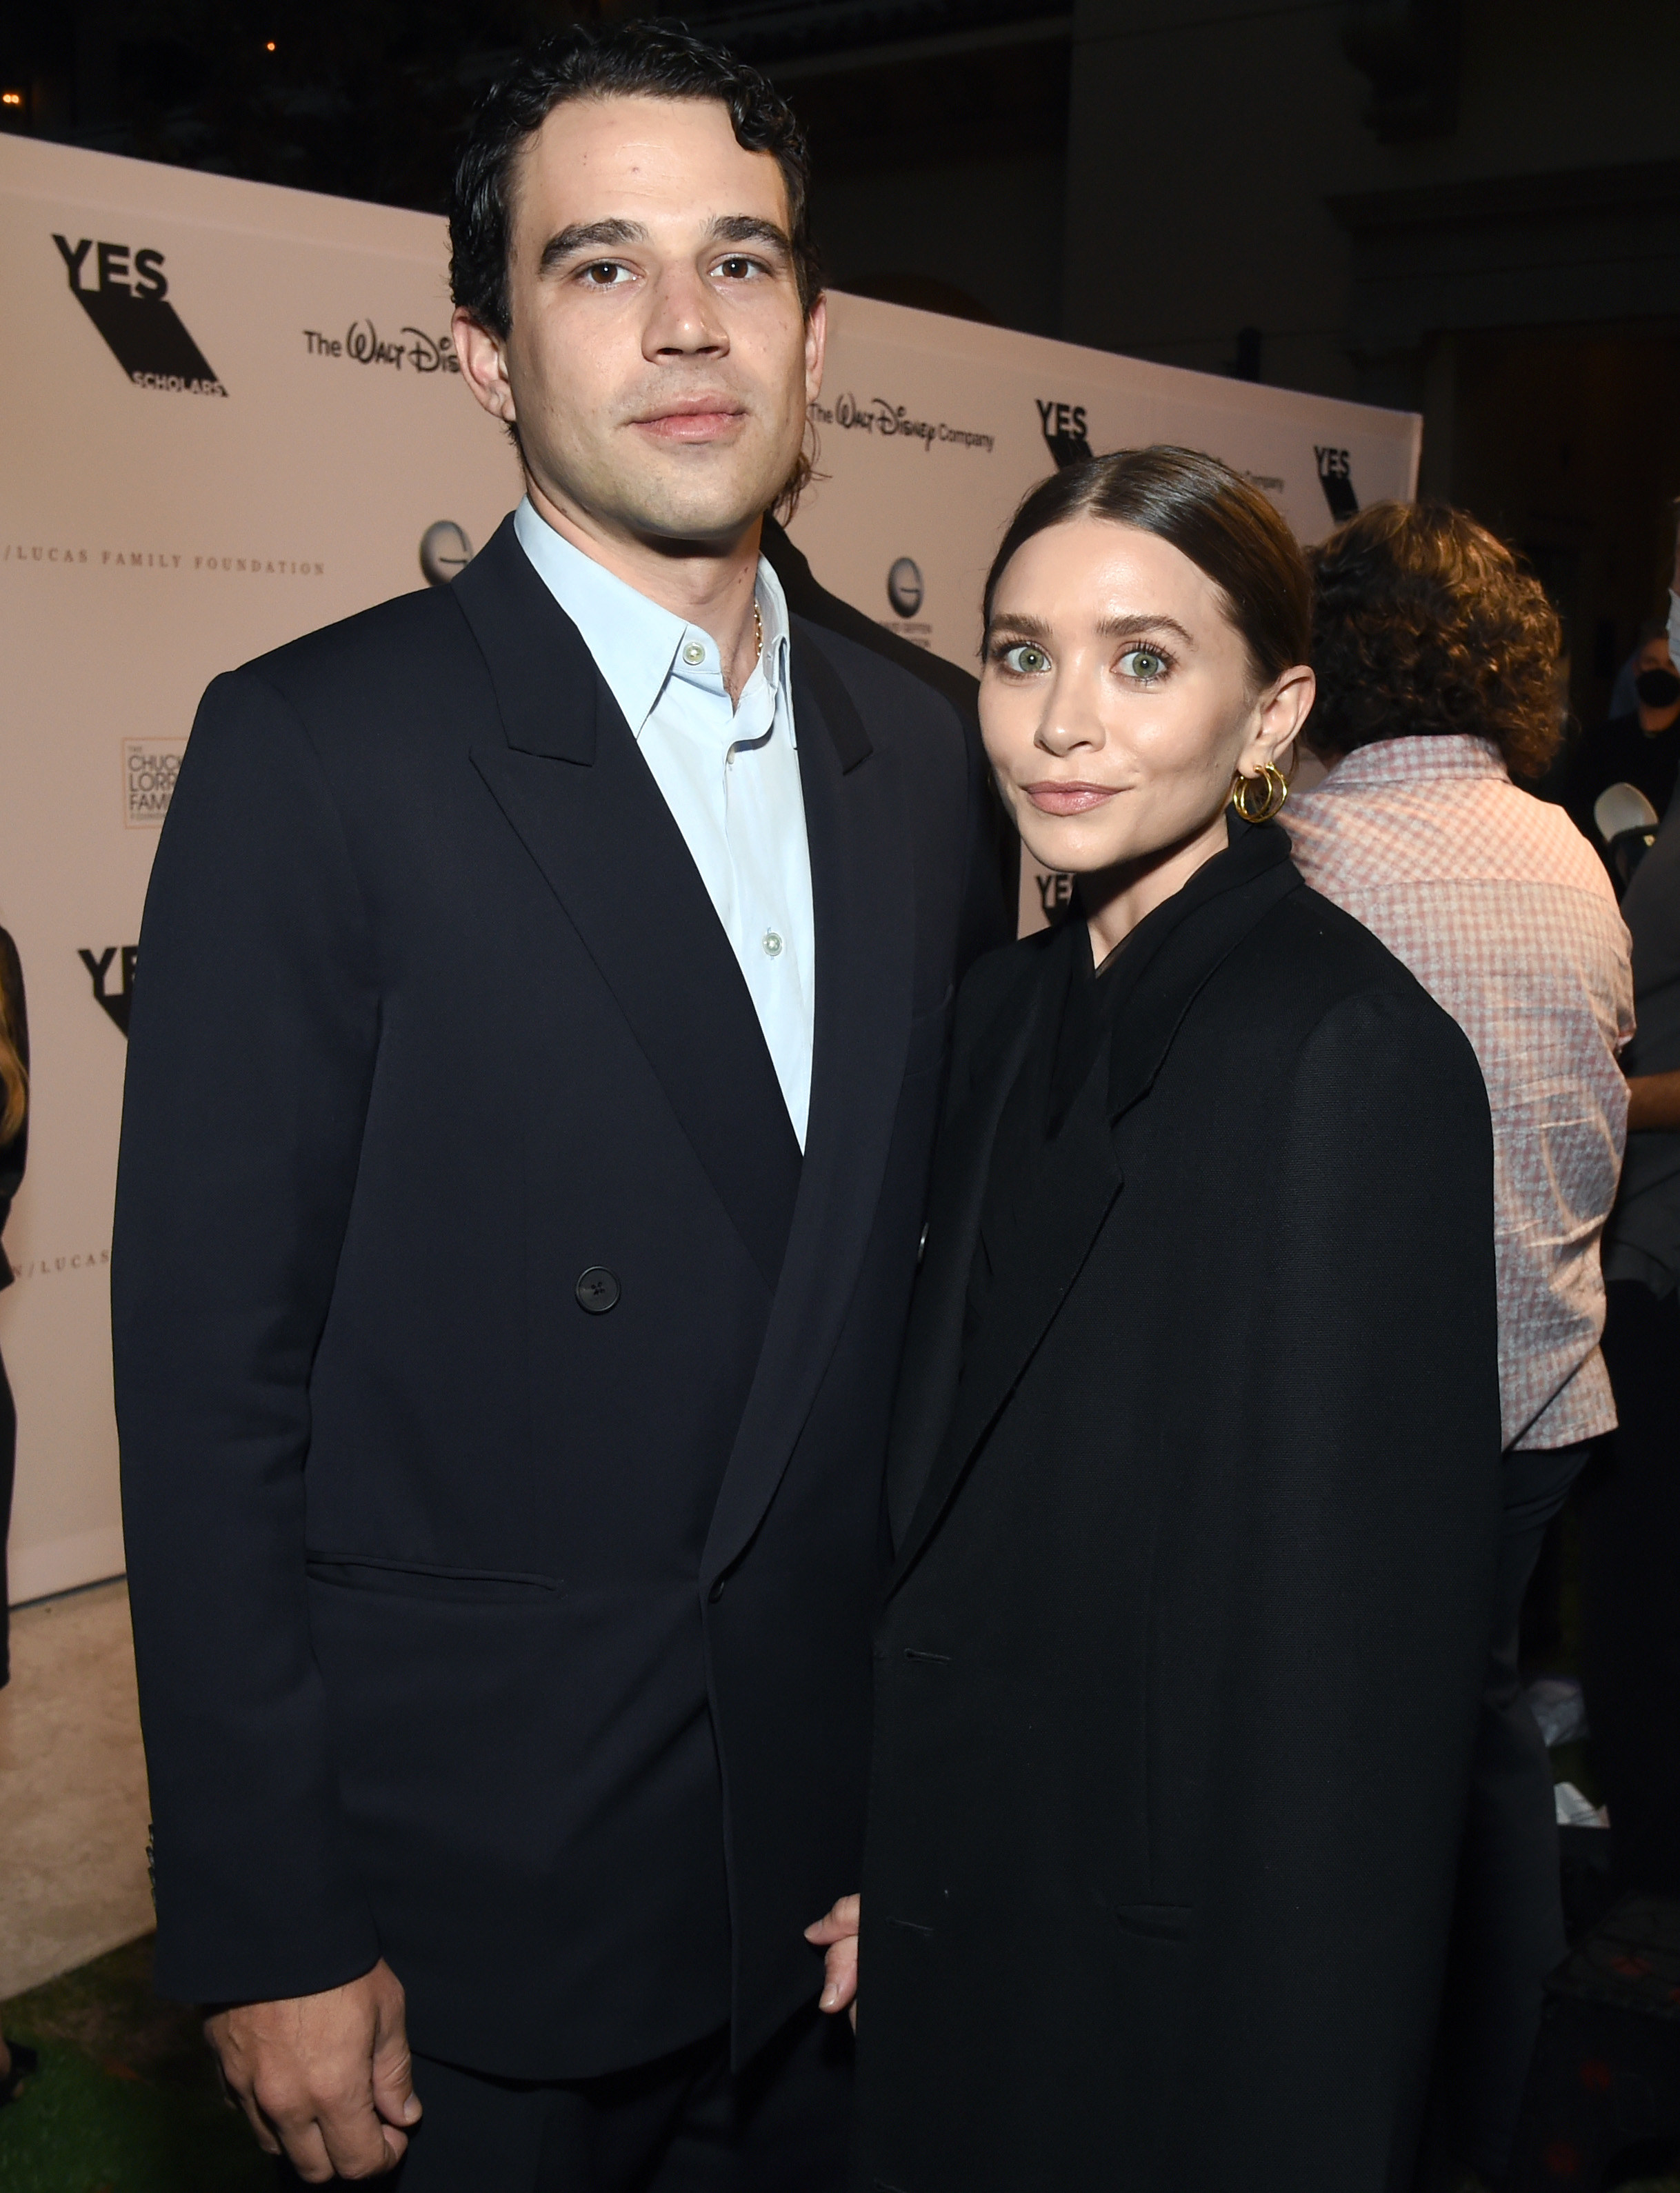 Ashley with boyfriend Louis Eisner wearing all black at an event